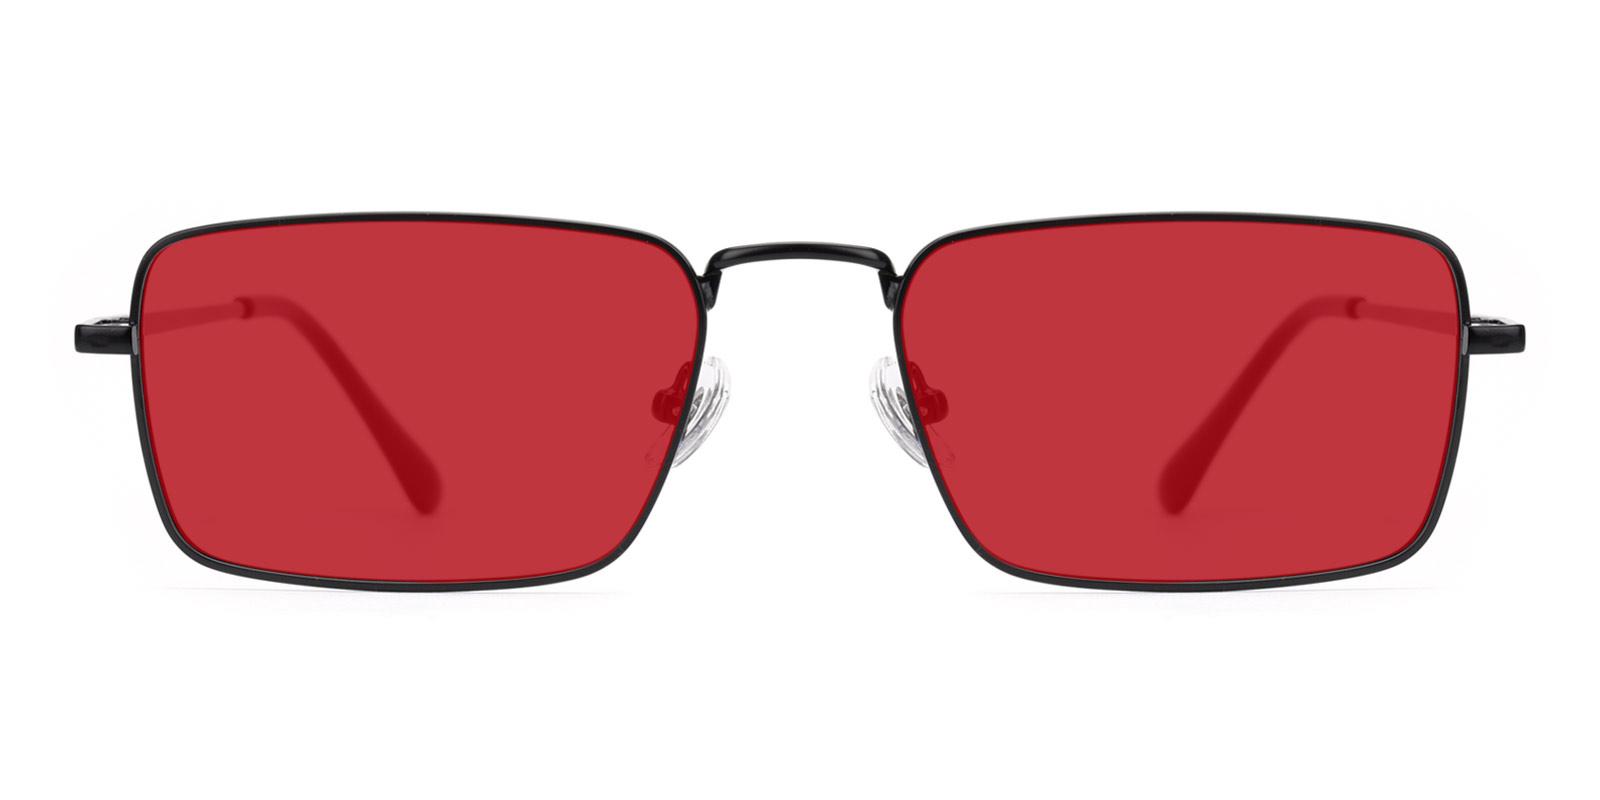 Phoebe-Red-Rectangle-Metal-Sunglasses-detail